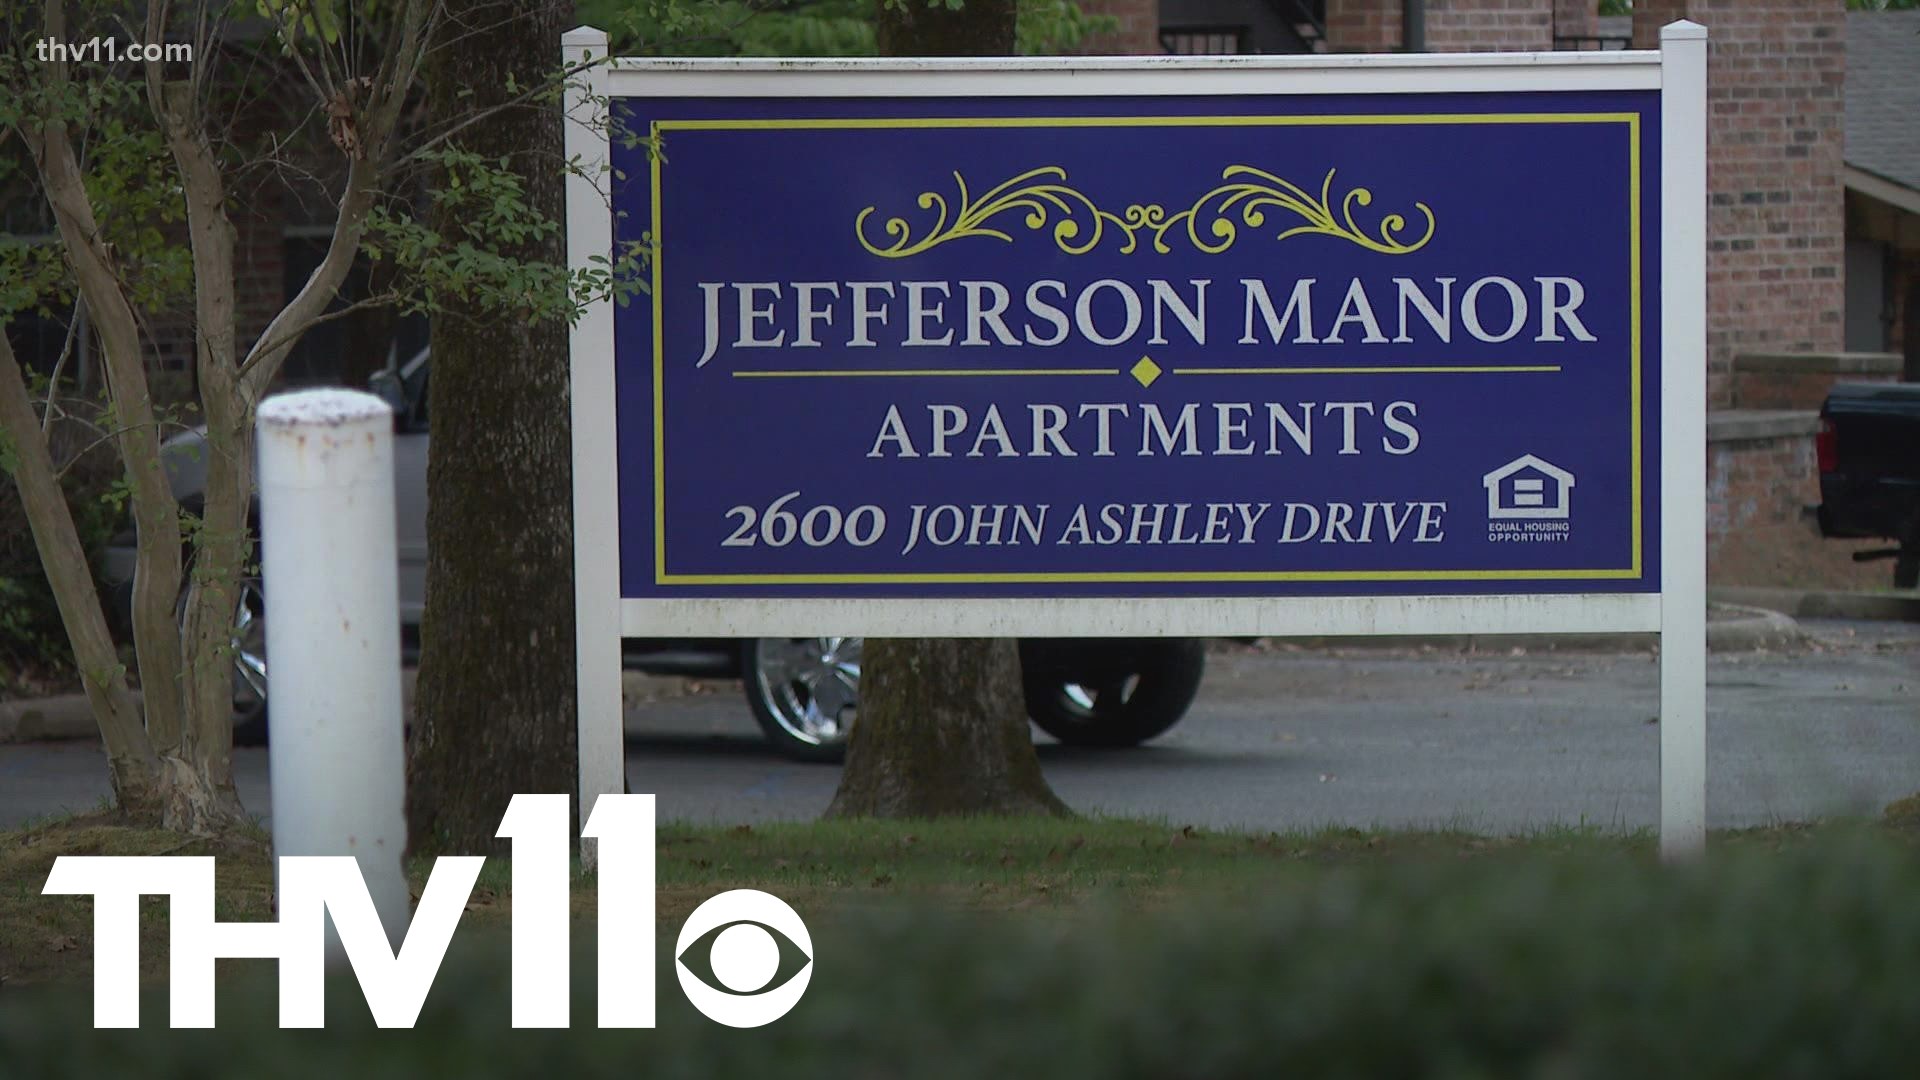 Residents at the Jefferson Manor Apartments in North Little Rock speak out about how their living conditions have been going downhill.